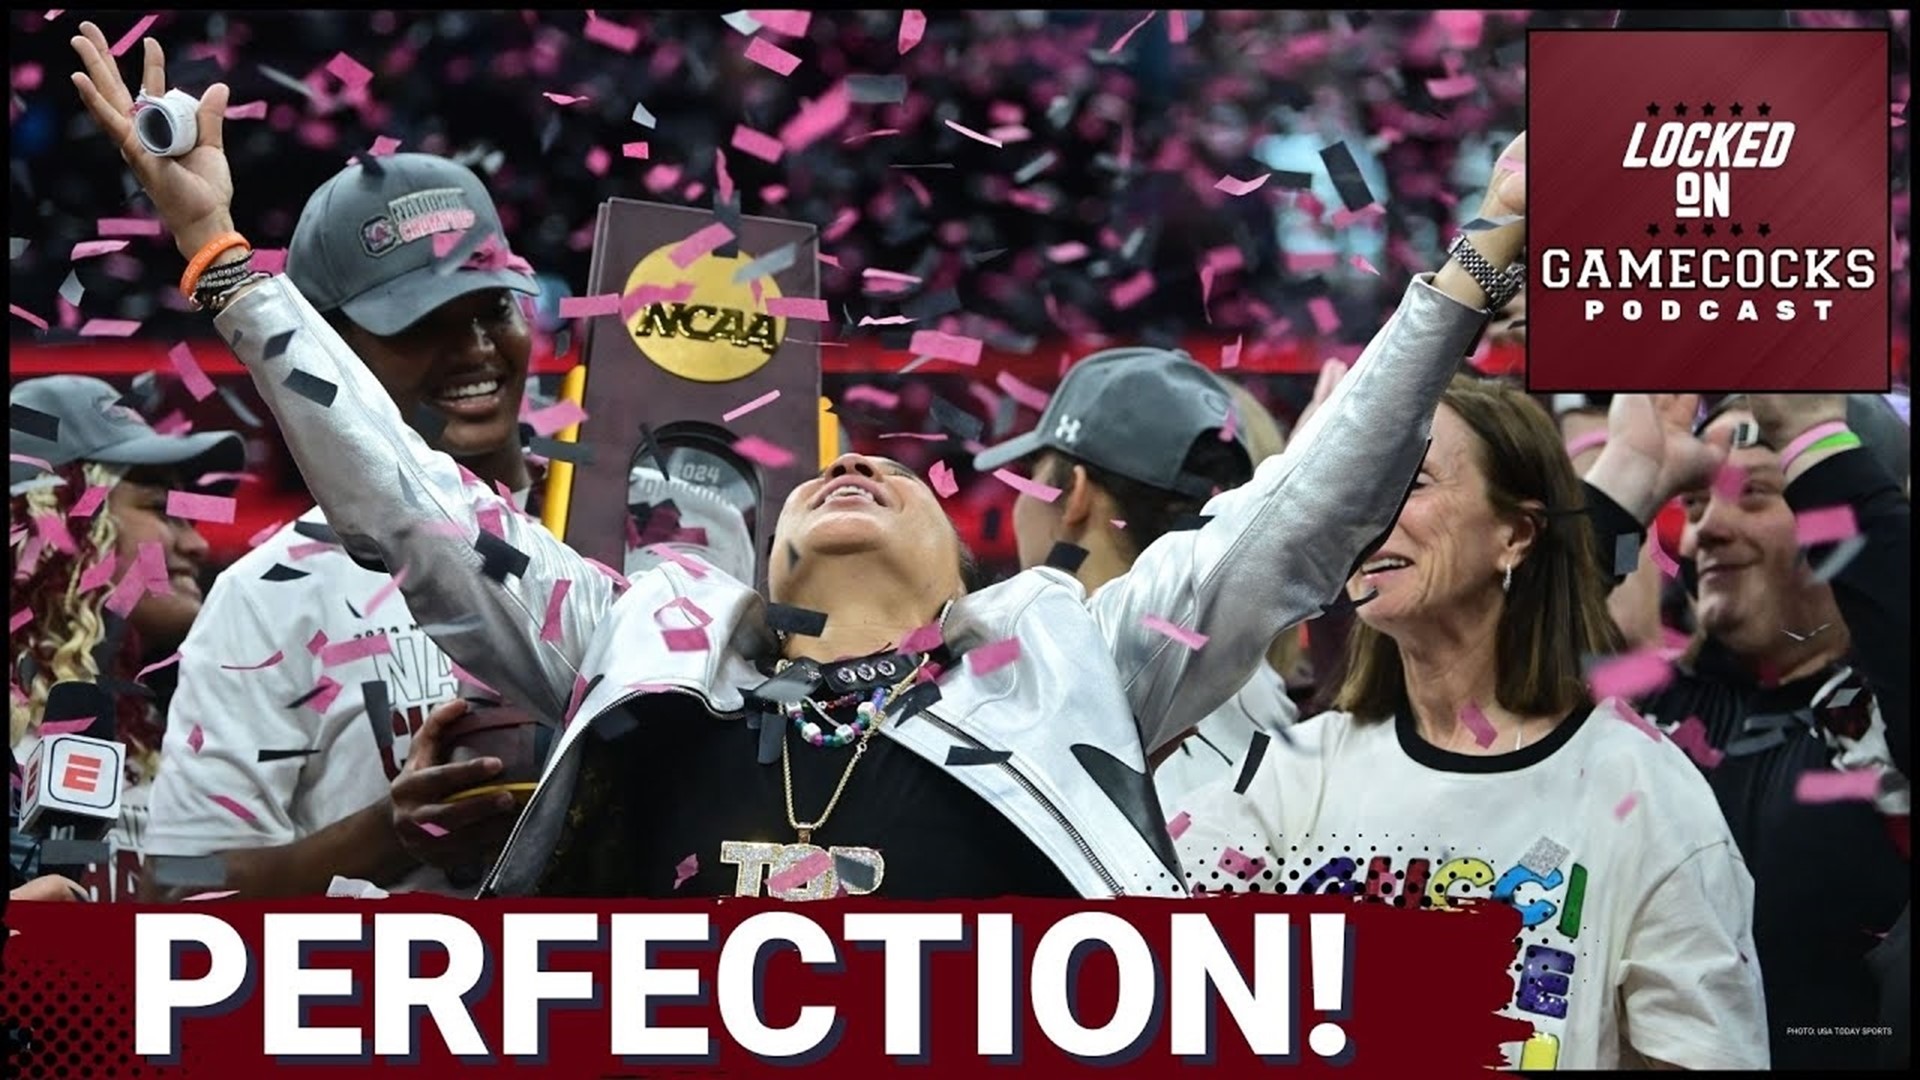 Dawn Staley and South Carolina's women's basketball team officially completed their revenge tour on Sunday afternoon when they defeated Caitlin Clark and Iowa.